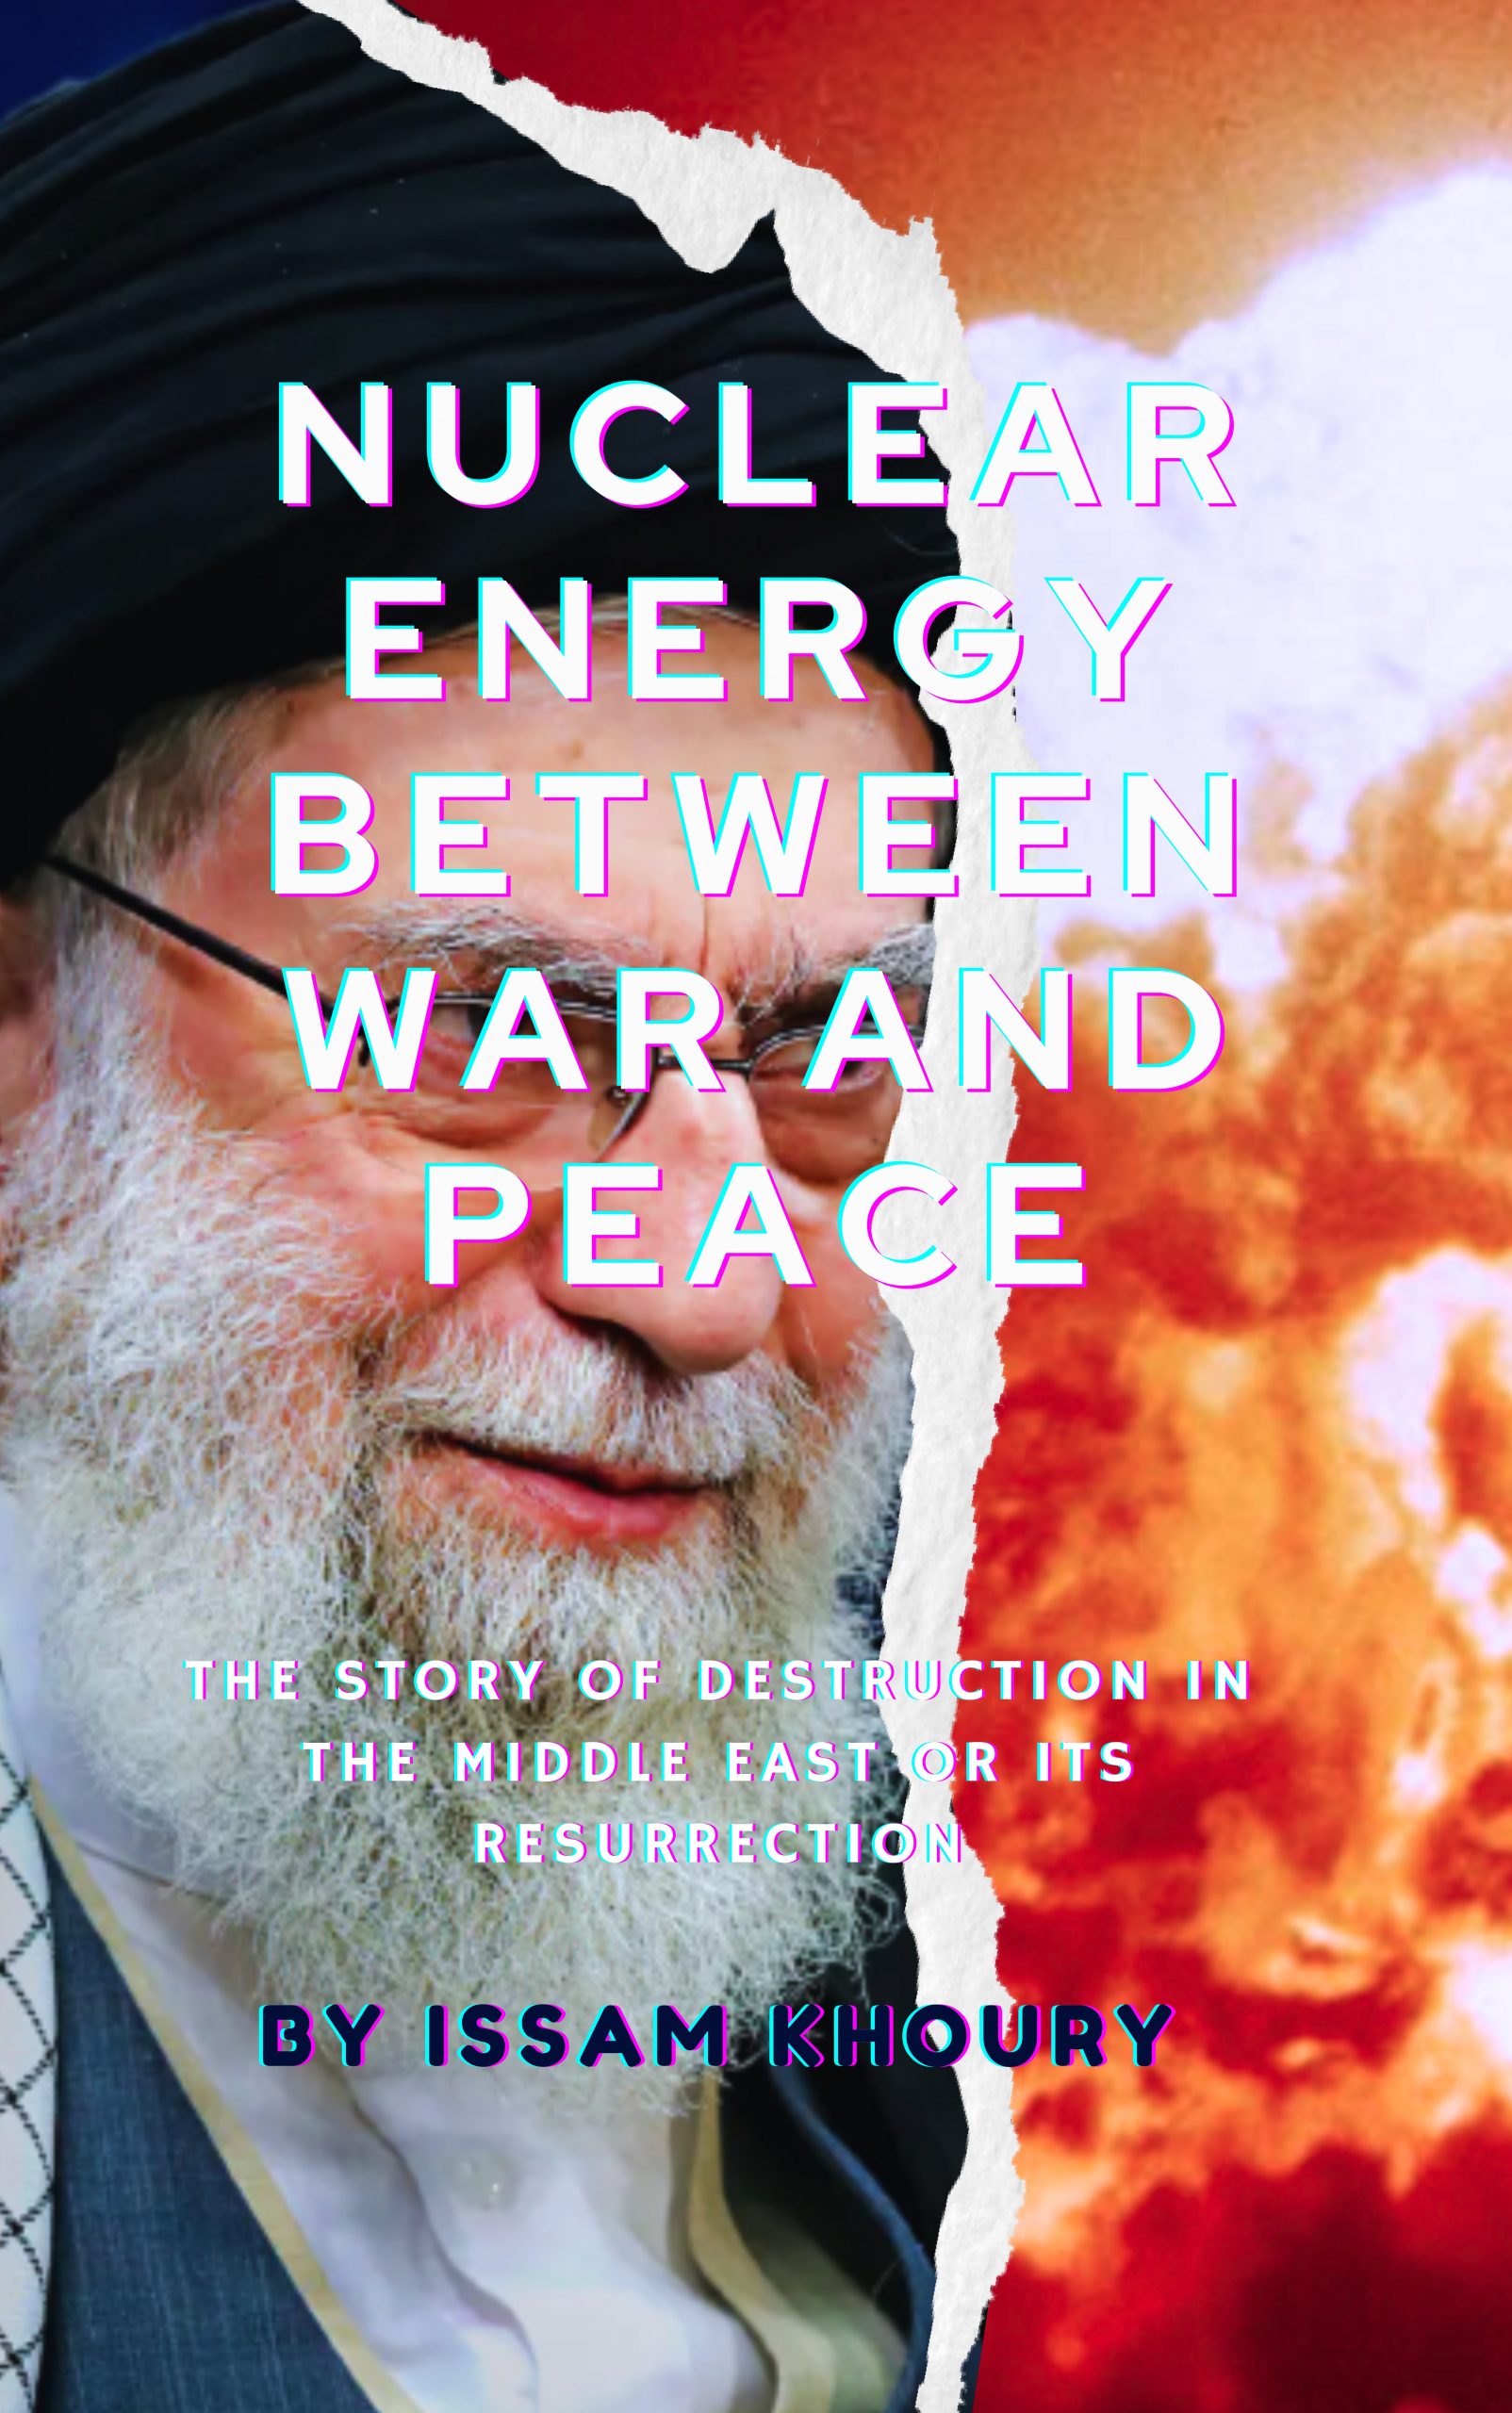 Nuclear Energy Between Peace And War: The story of destruction in the Middle East or its resurrection